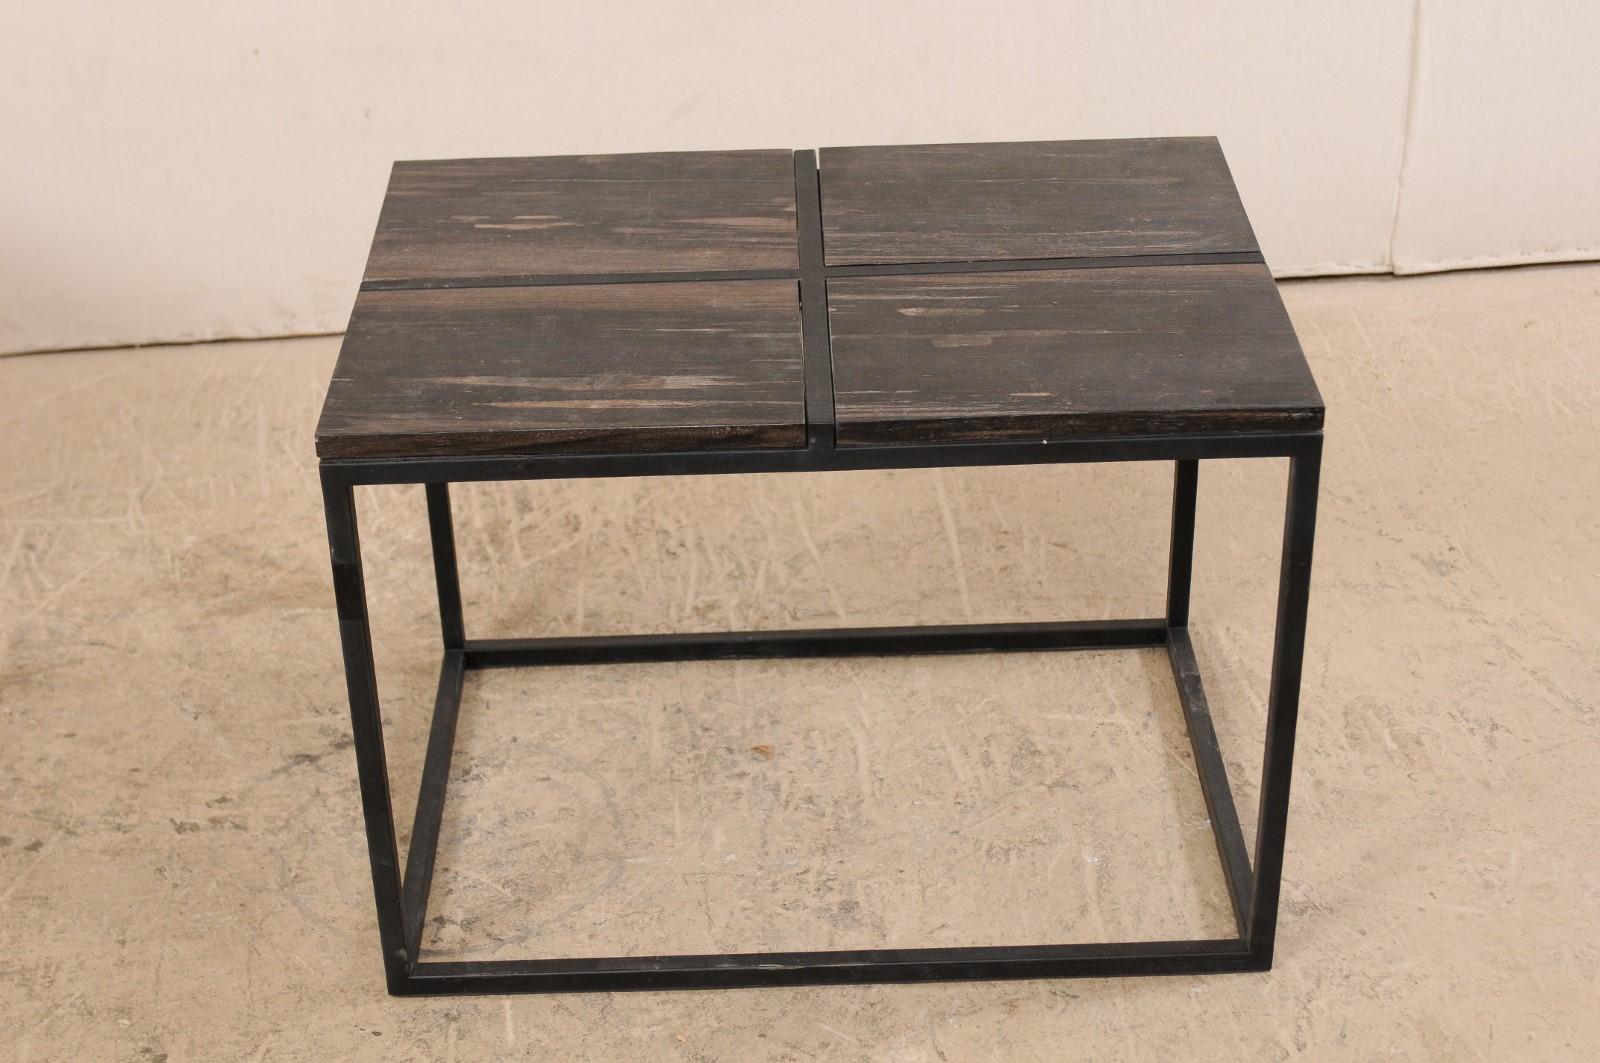 Pair of Petrified Wood Top Modern Style Coffee Tables In Good Condition For Sale In Atlanta, GA